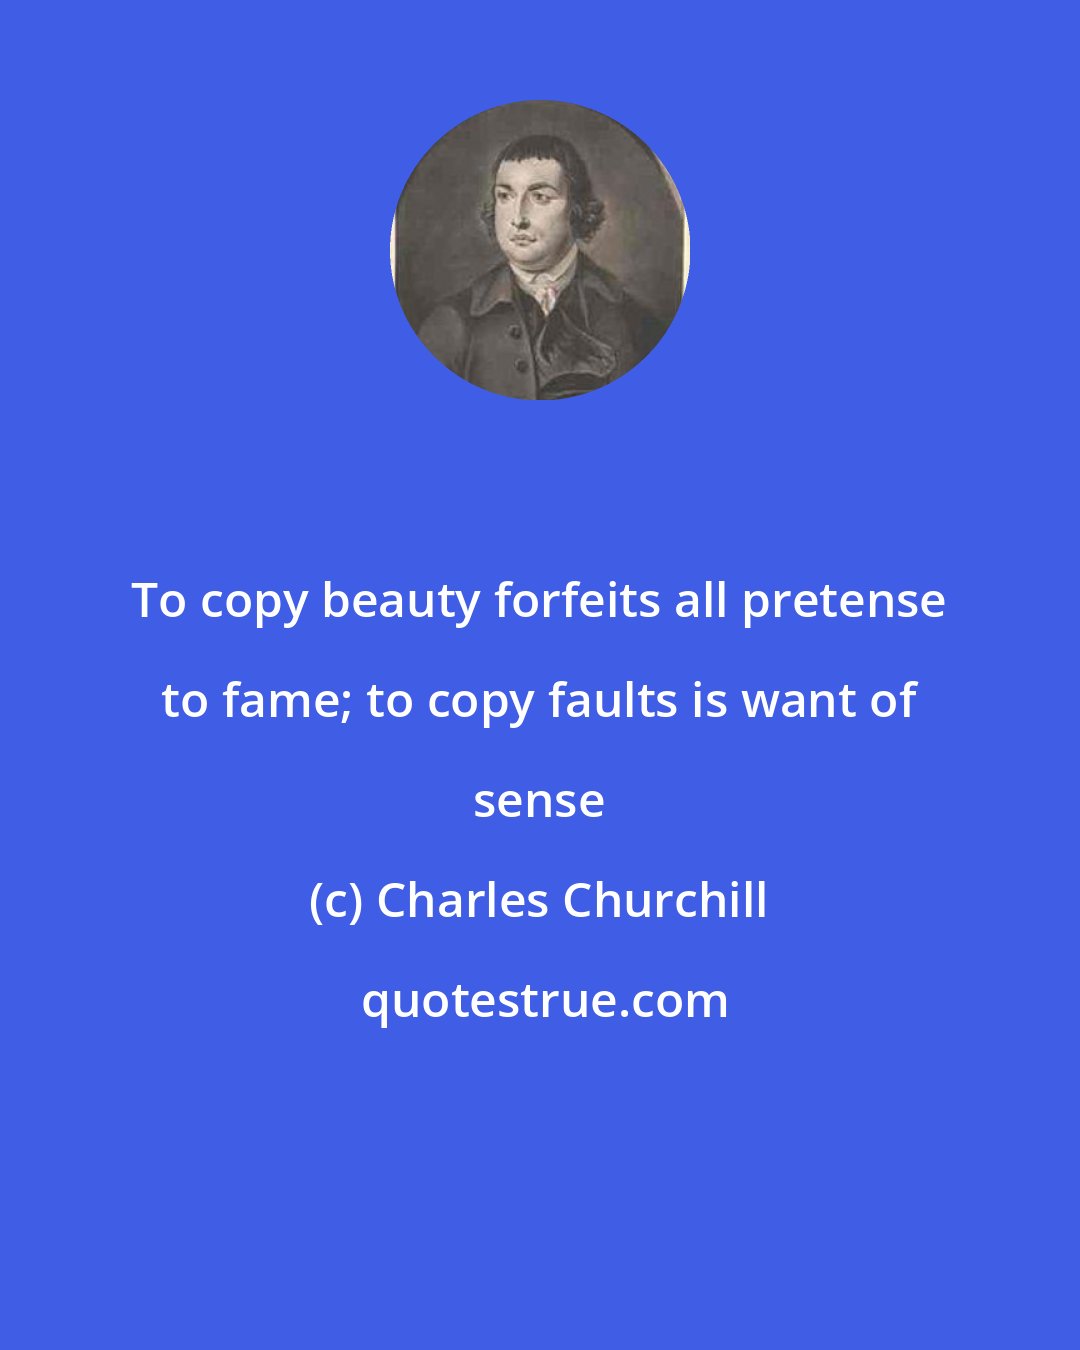 Charles Churchill: To copy beauty forfeits all pretense to fame; to copy faults is want of sense